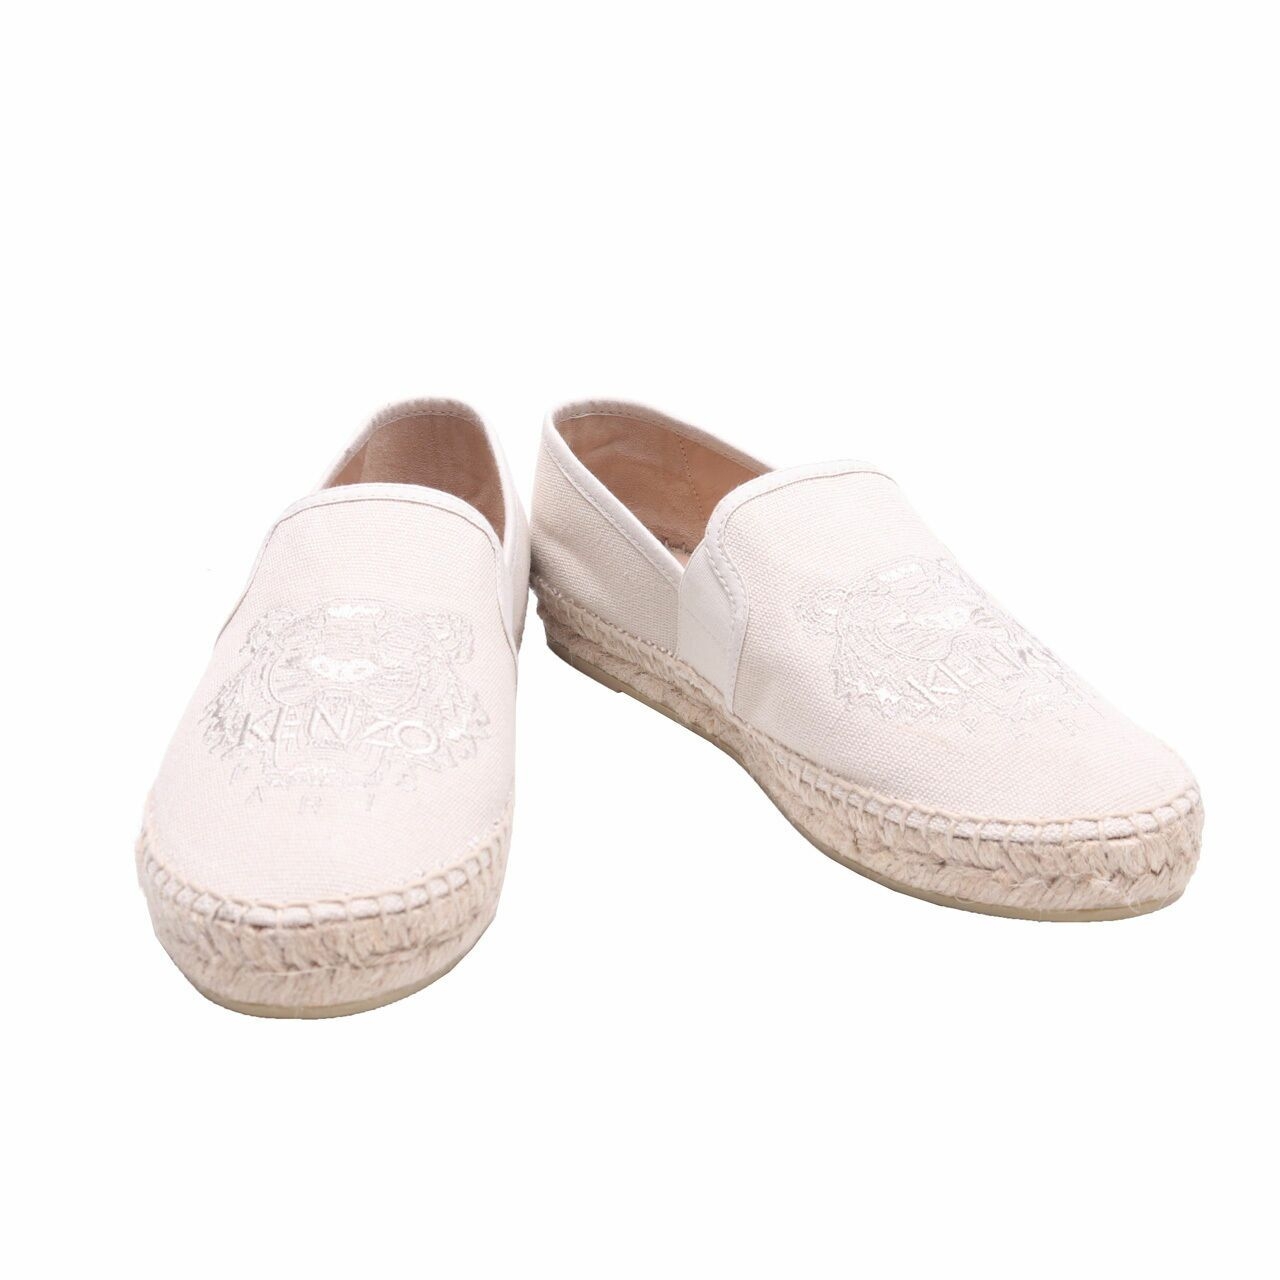 Kenzo Tiger Head Embroidery Canvas Cream Esspadrilles Flat Shoes